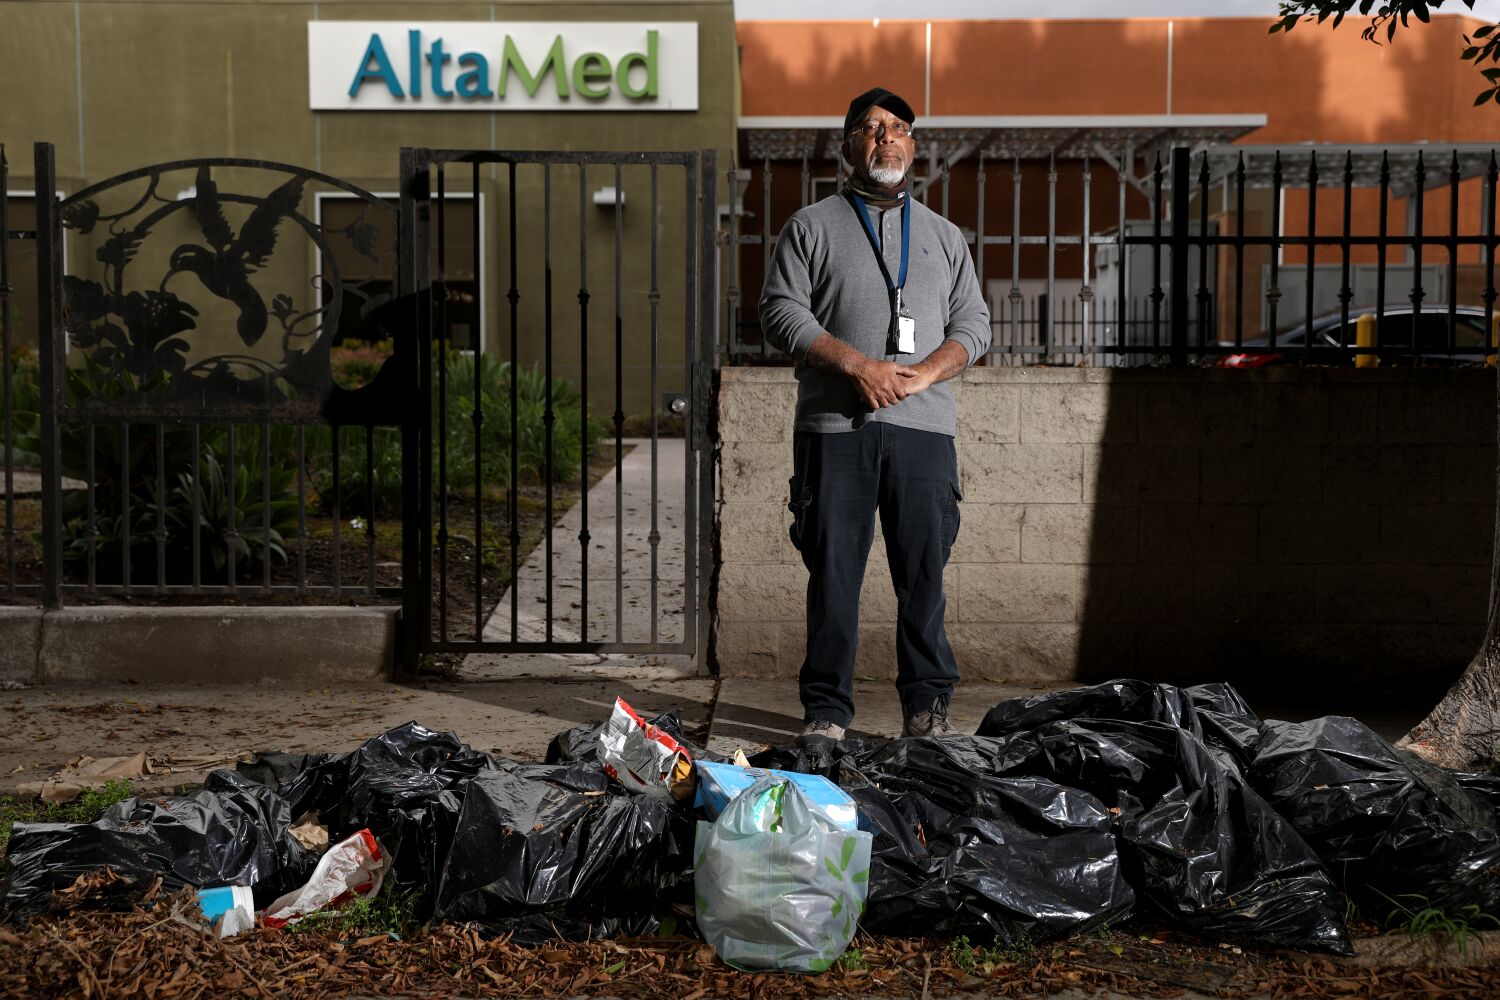 Illegal dumping has plagued Watts for decades. Residents are fed up